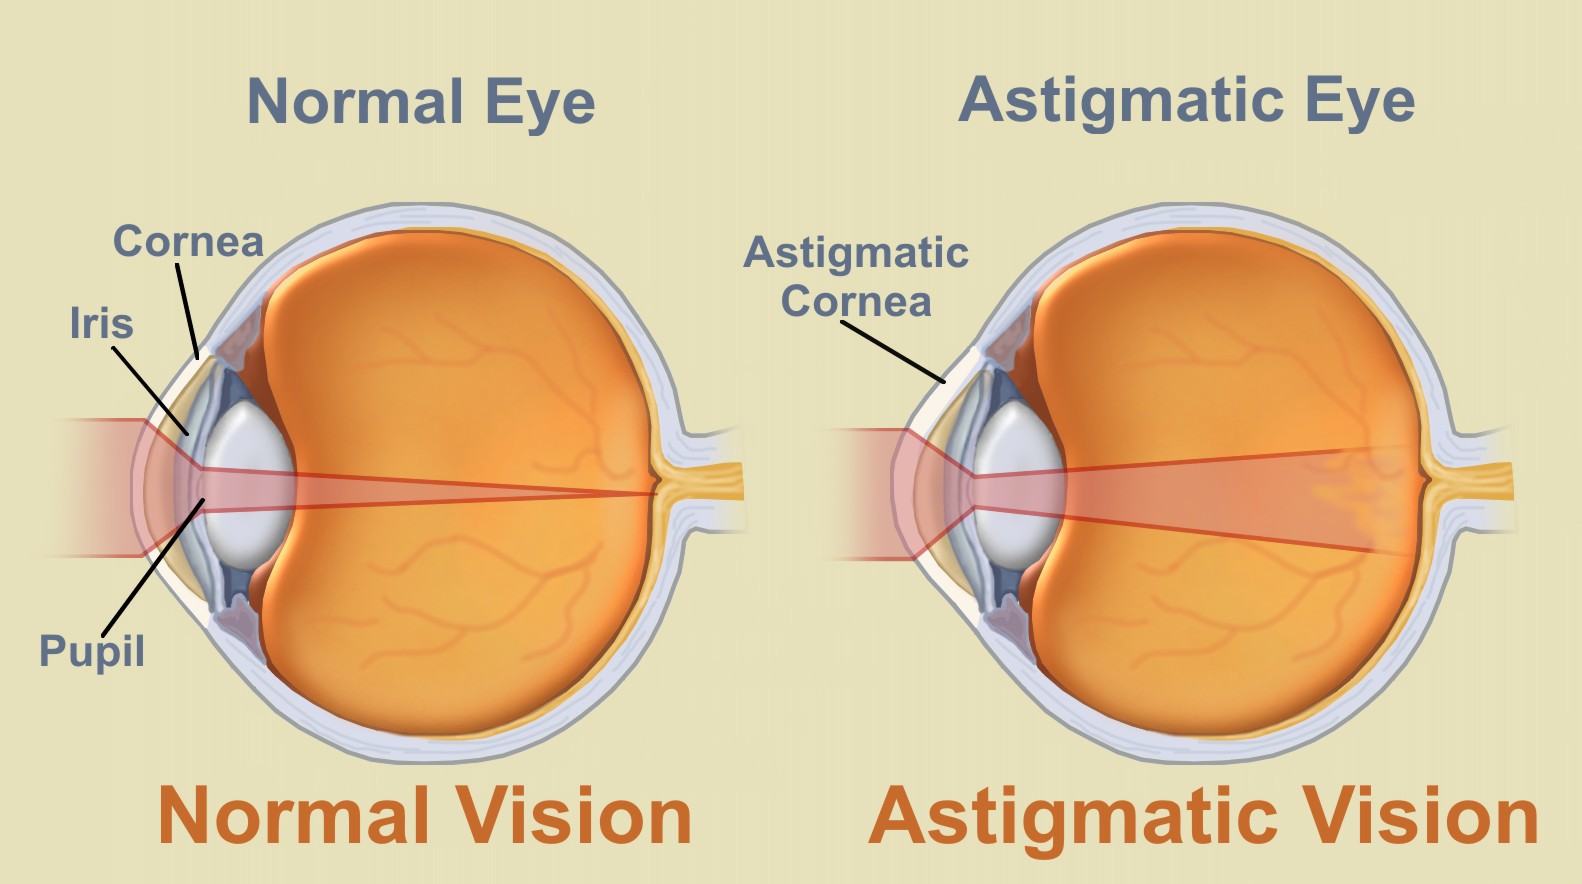 Can An Astigmatism Slow Down A Baby’s Development?